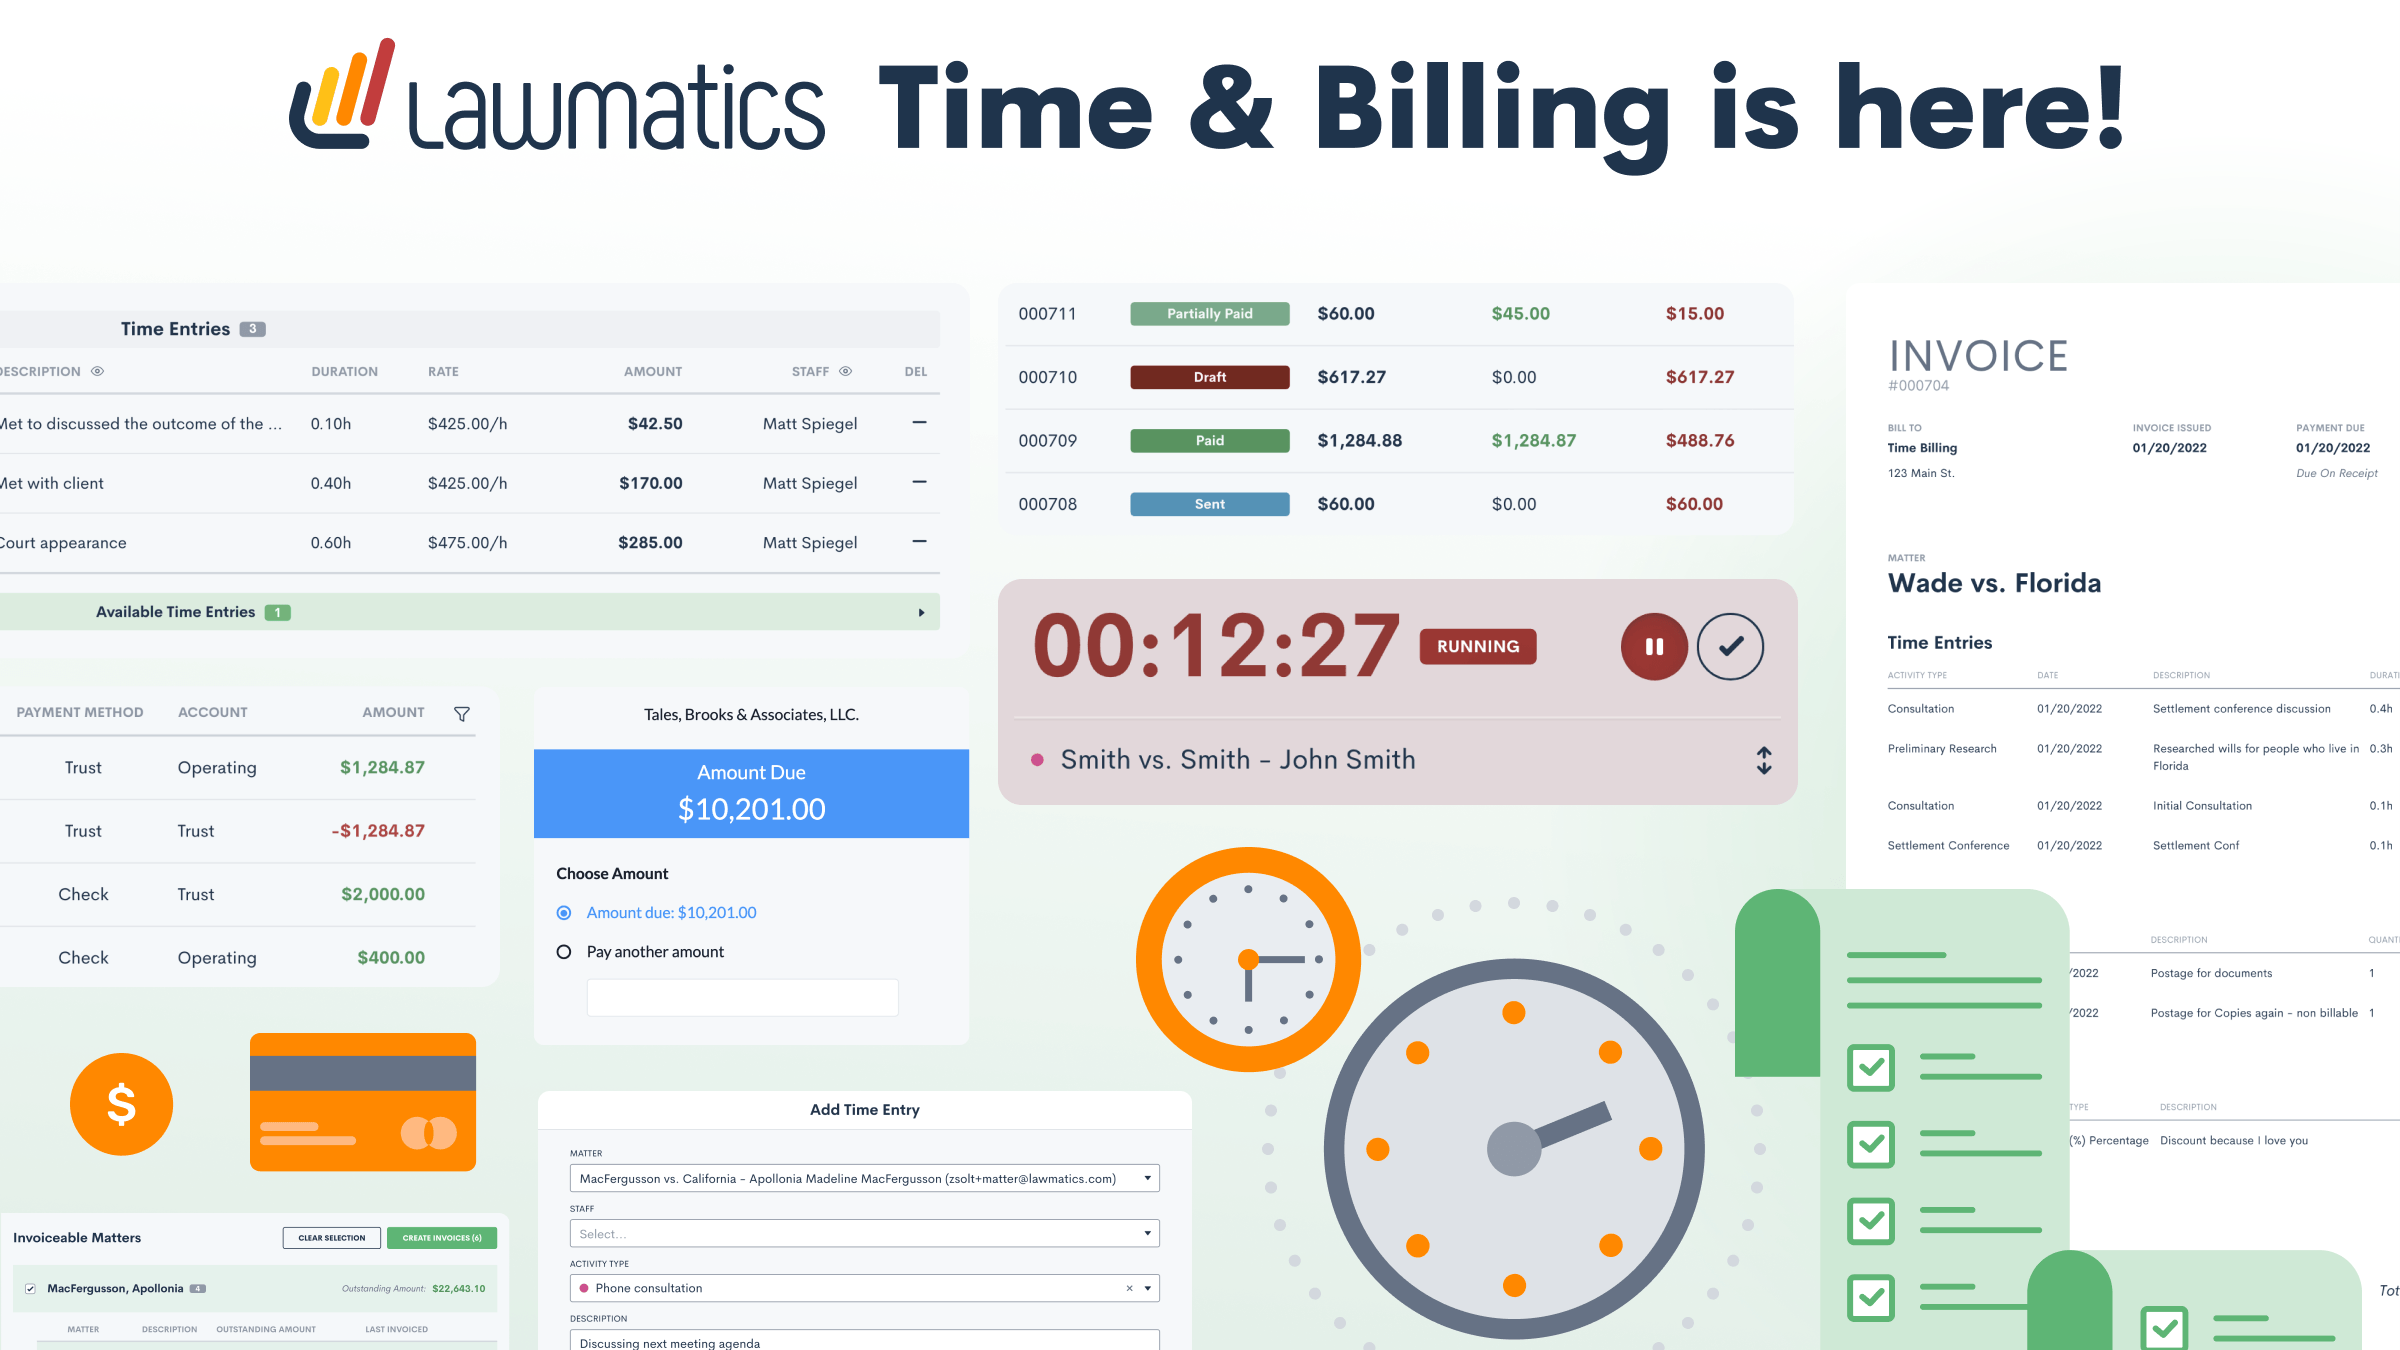 CRM Platform Lawmatics Expands with Time and Billing Features; Adds E-Payments through Gravity Legal